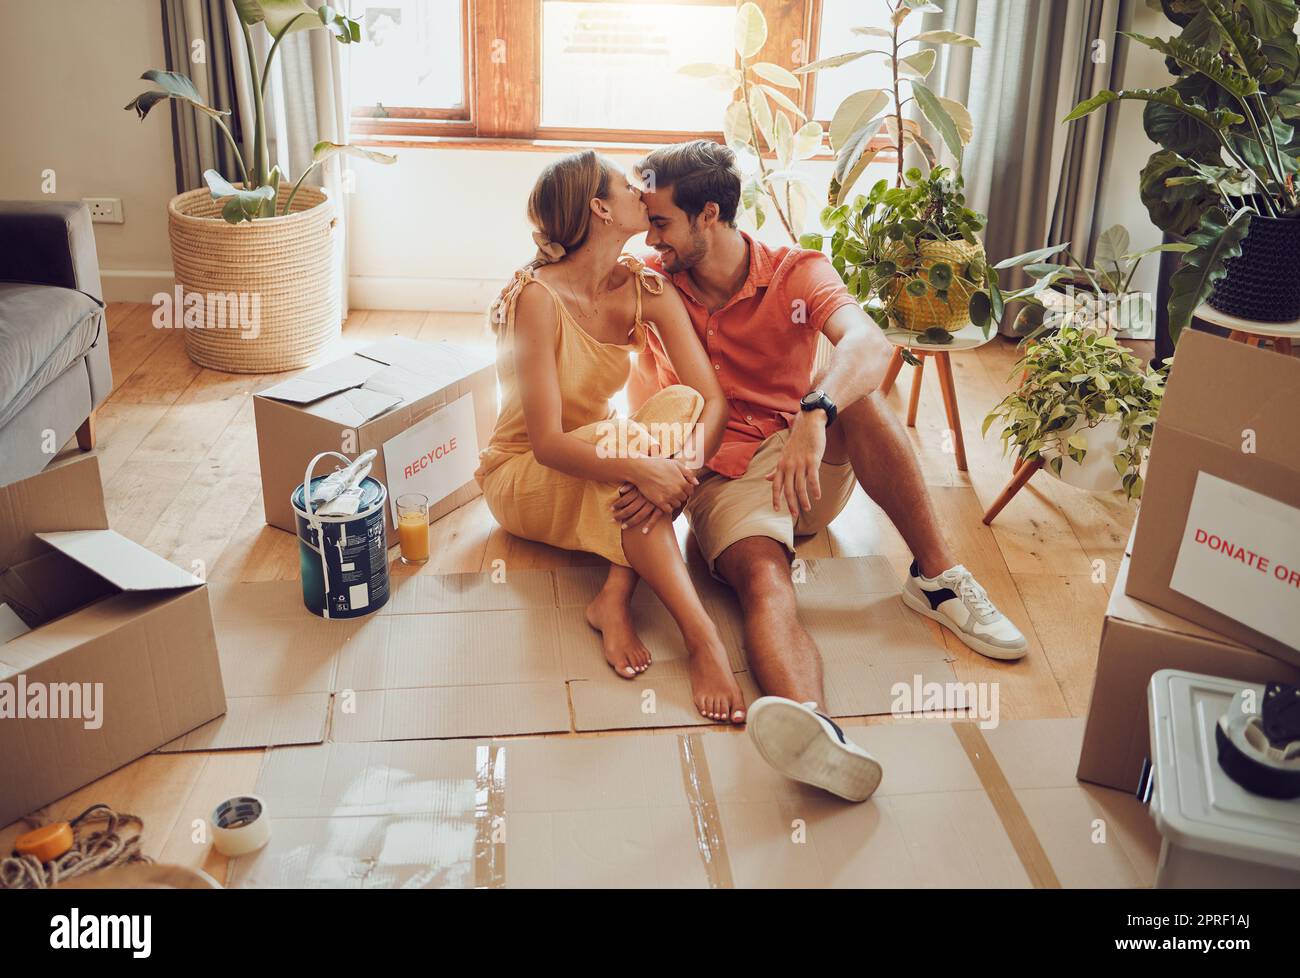 New home owners moving into a house showing affectionate, taking a break from painting and remodeling the living room interior design. In love and loving house wife kissing husband after decorating Stock Photo